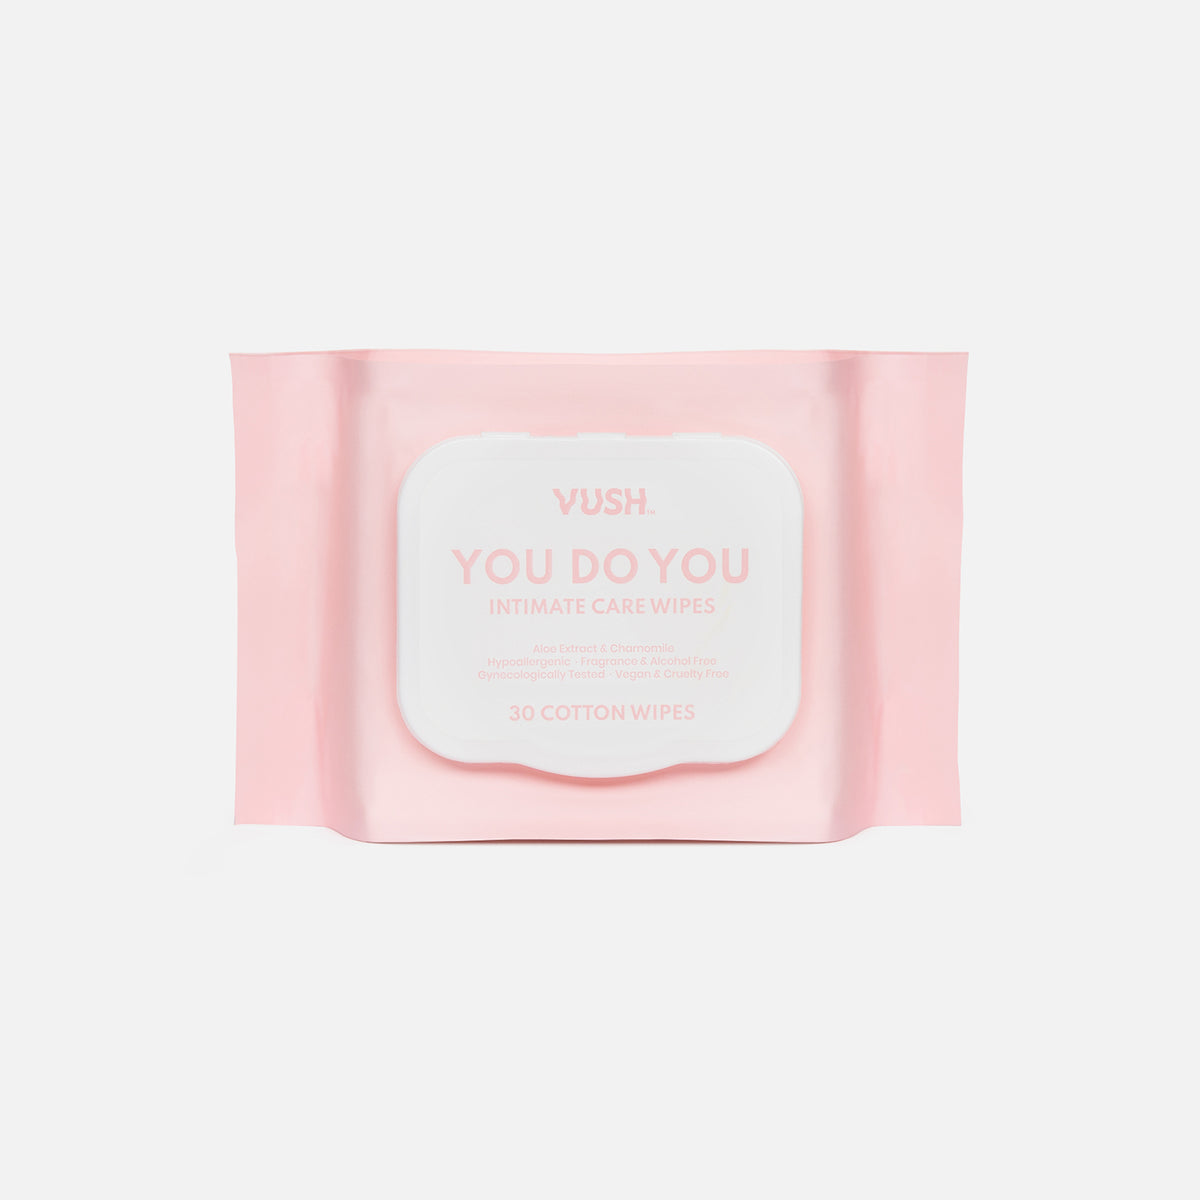 Intimate Wipes